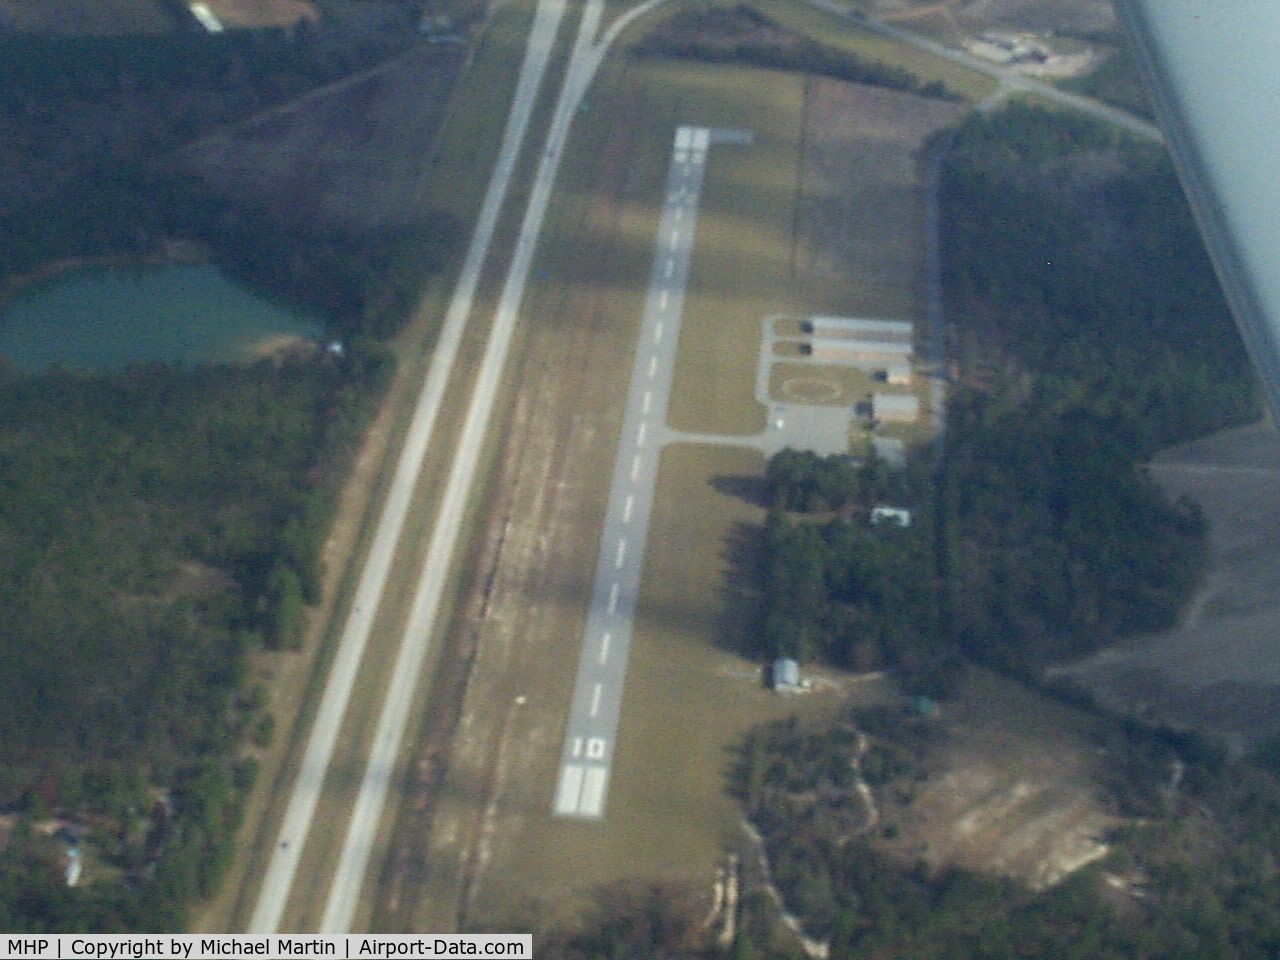 Metter Municipal Airport (MHP) - Metter Muni Airprt - Don't confuse the Interstate for the runway!